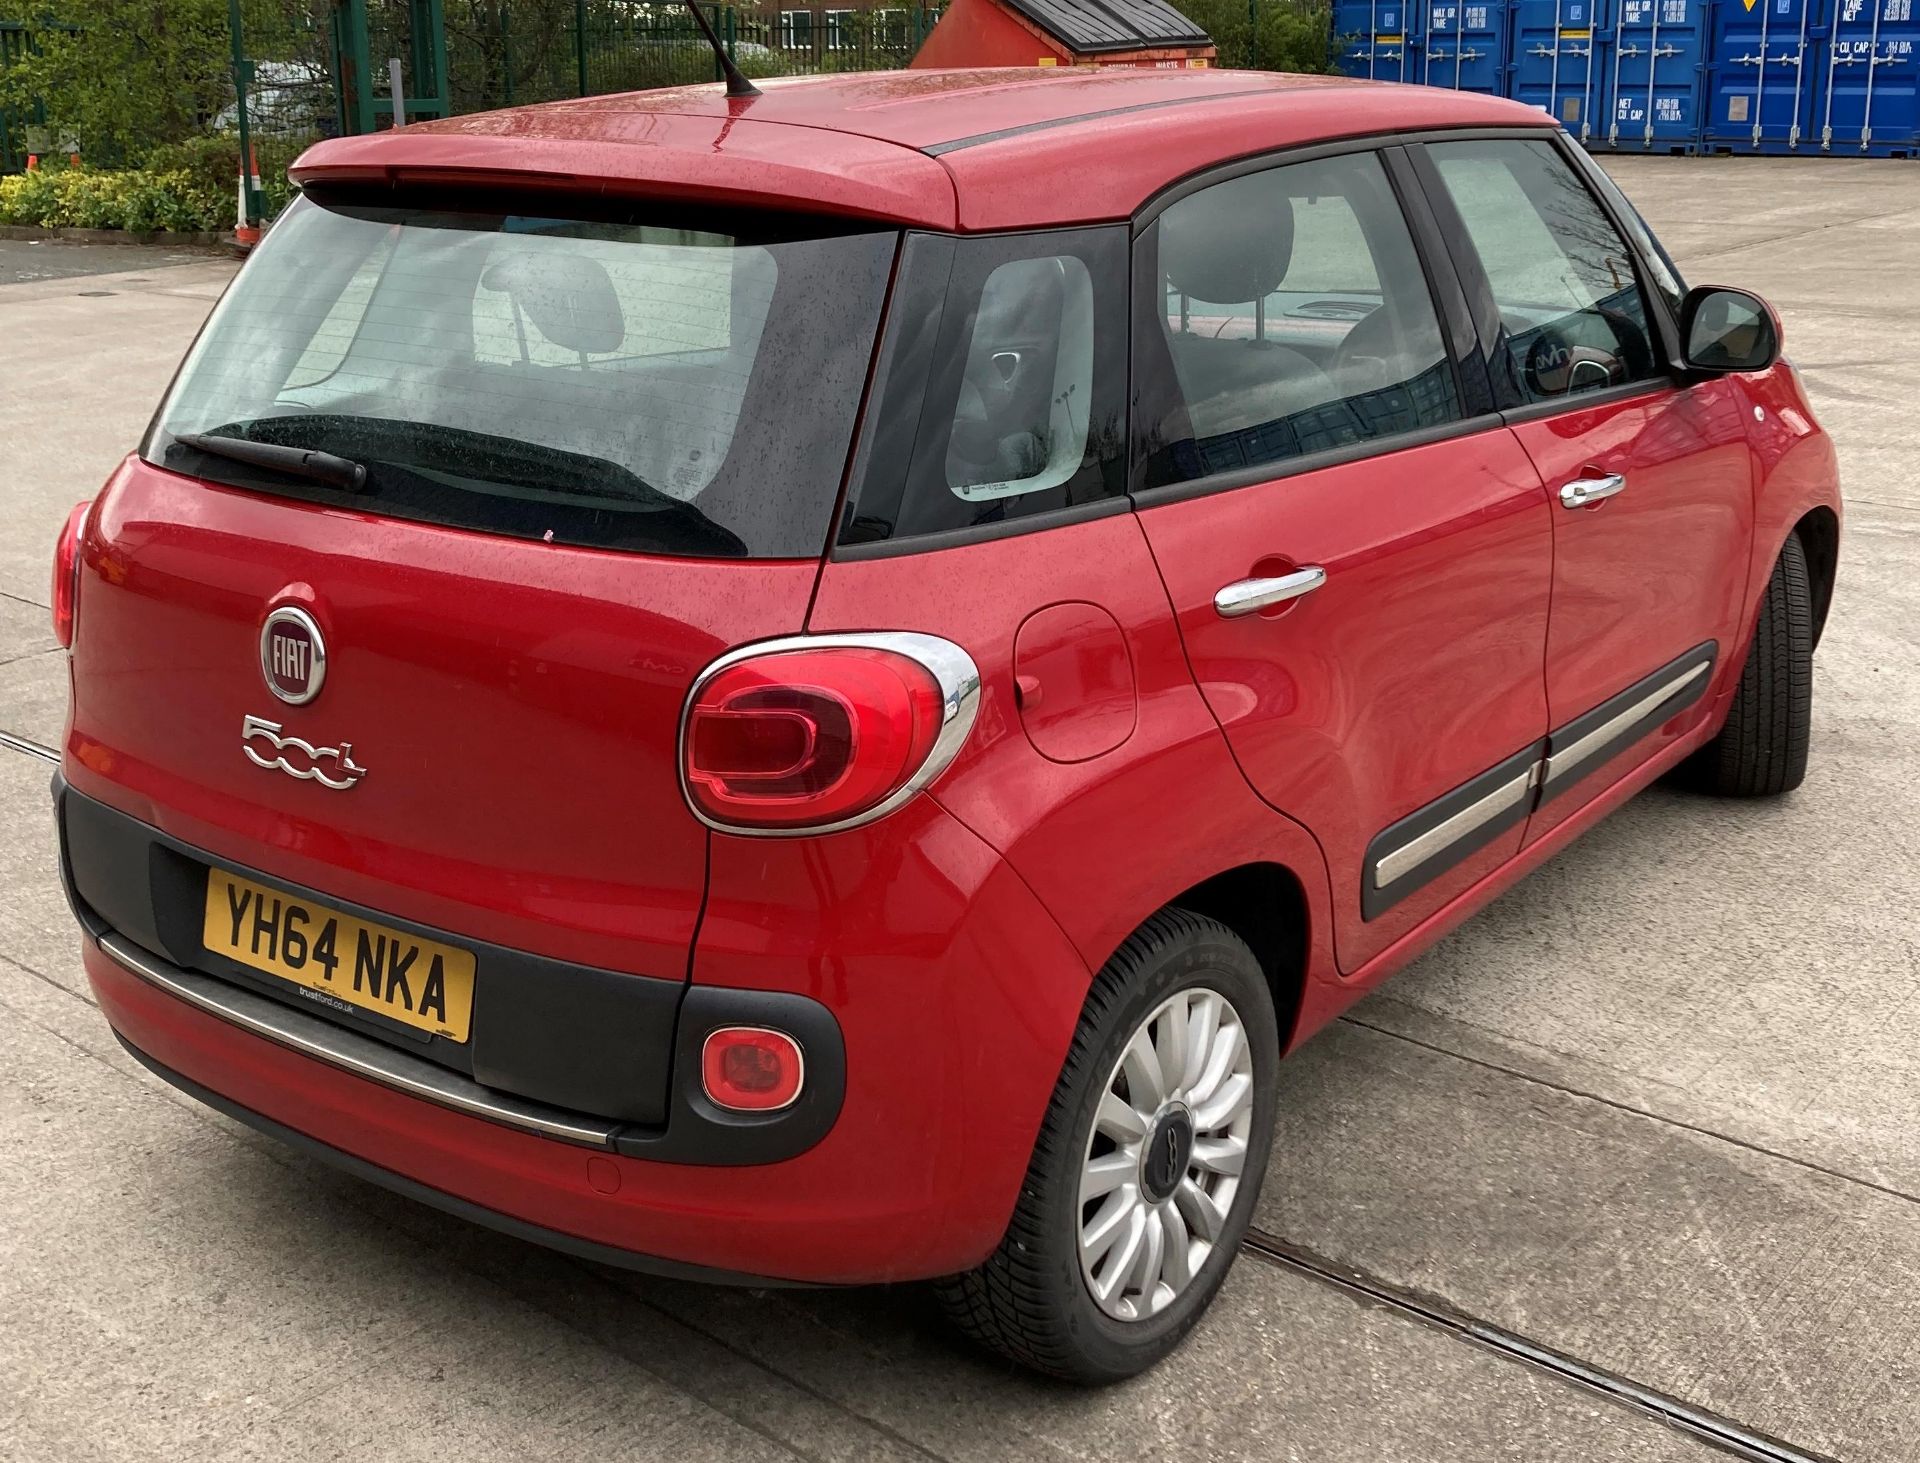 FIAT 500L POP STAR MULTI-JET 1.2 MPV - DIESEL - RED. On the instructions of: A retained client. - Image 4 of 16